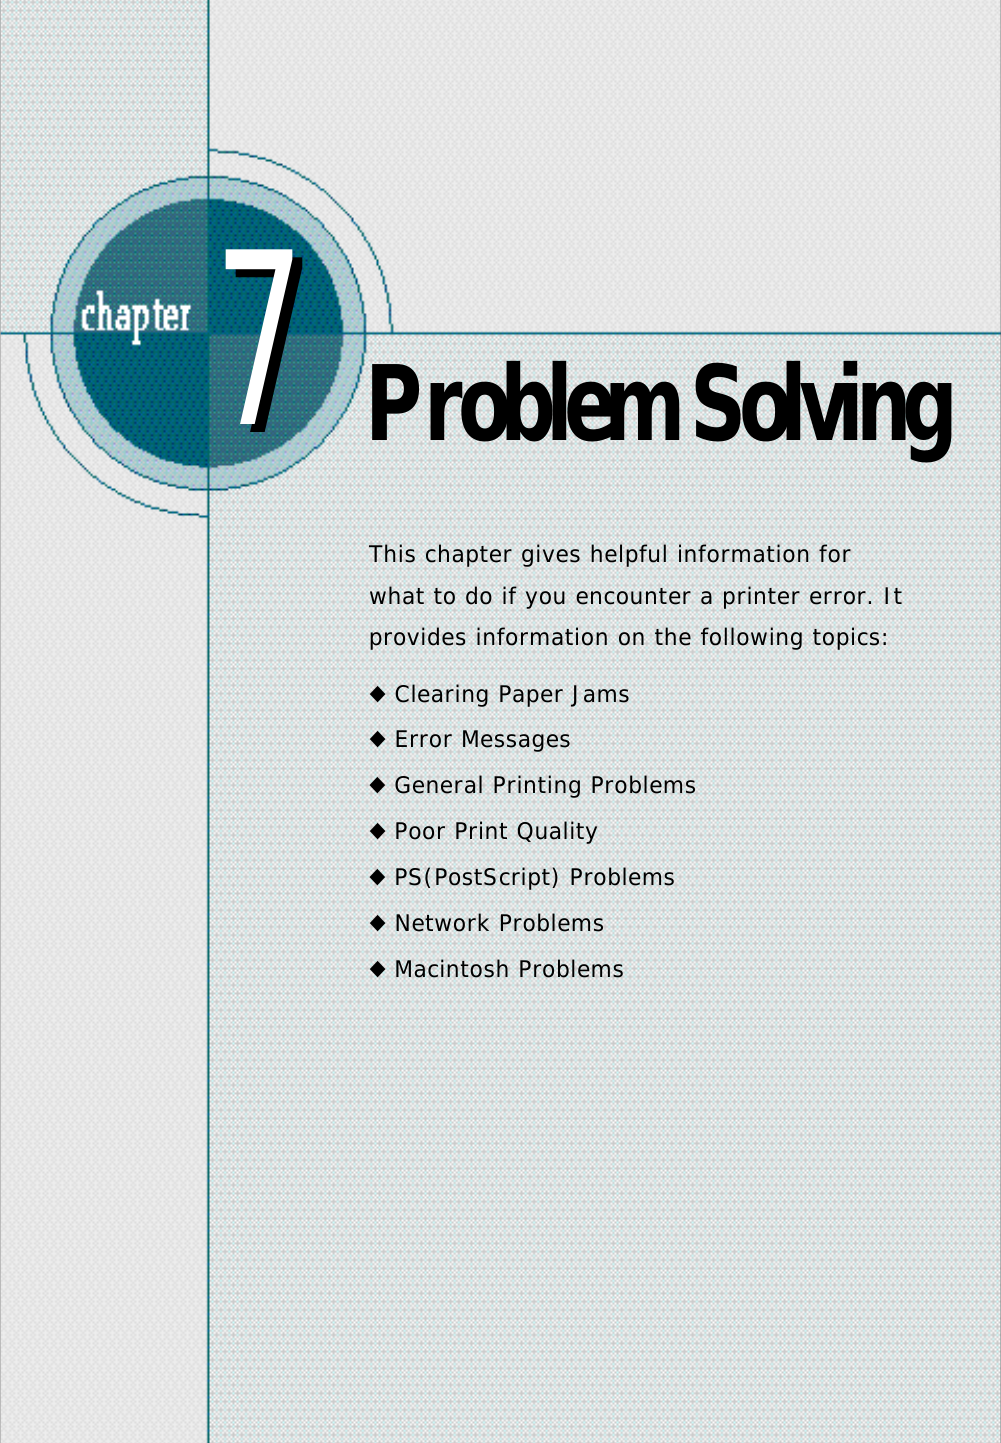 Problem SolvingThis chapter gives helpful information forwhat to do if you encounter a printer error. Itp r ovides information on the following topics:◆ Clearing Paper Jams◆ Error Messages◆ G e n e ral Printing Problems◆ Poor Print Quality◆ P S ( P ostScript) Problems◆ Network Problems◆ Macintosh Problems77